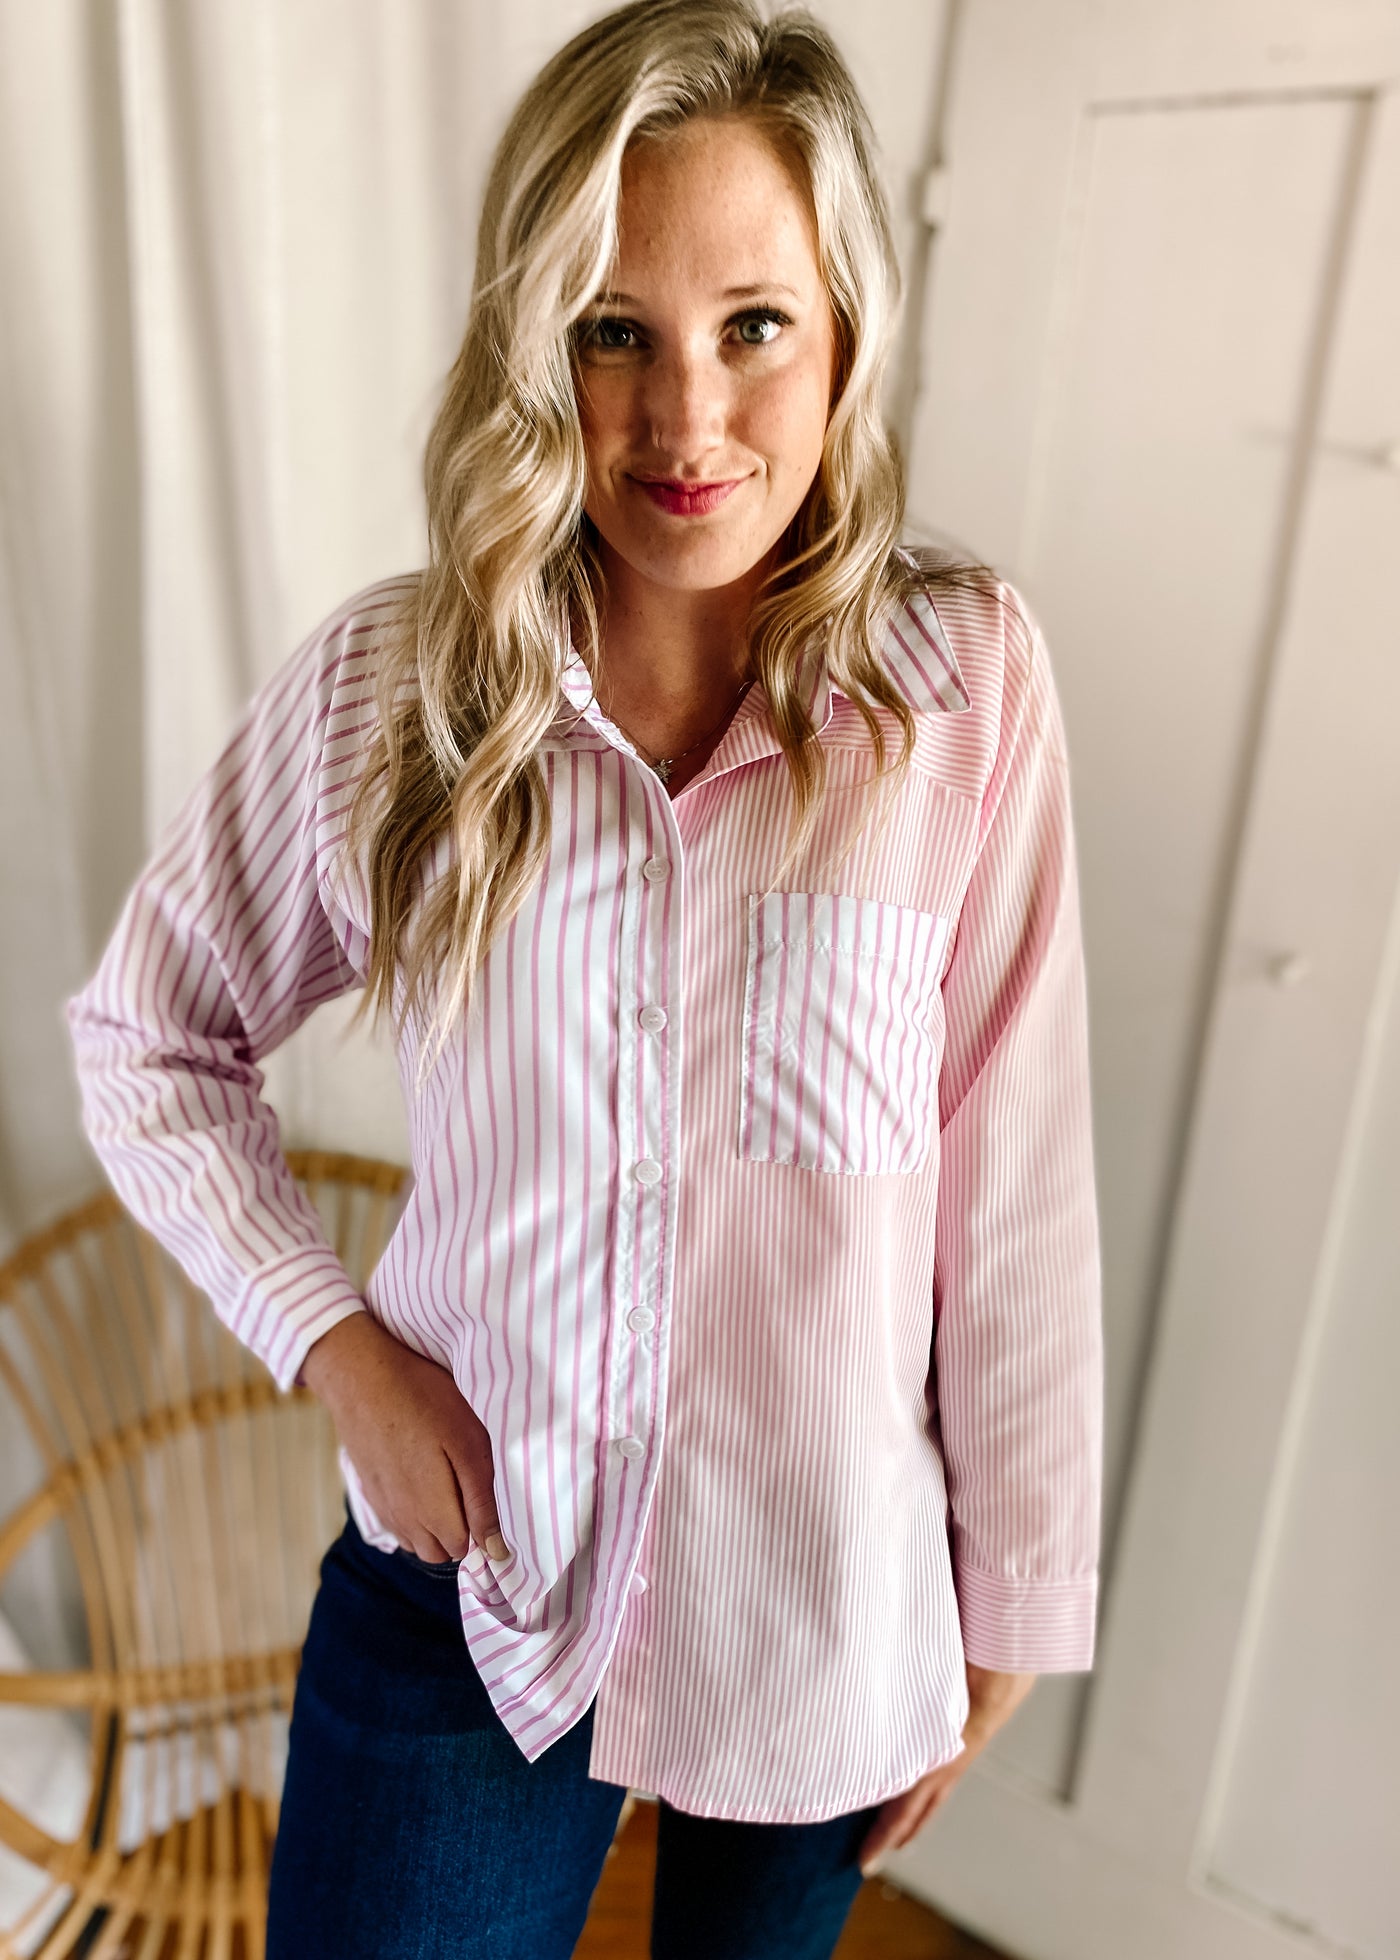 Colorblock Striped Long Sleeve Top in Pink